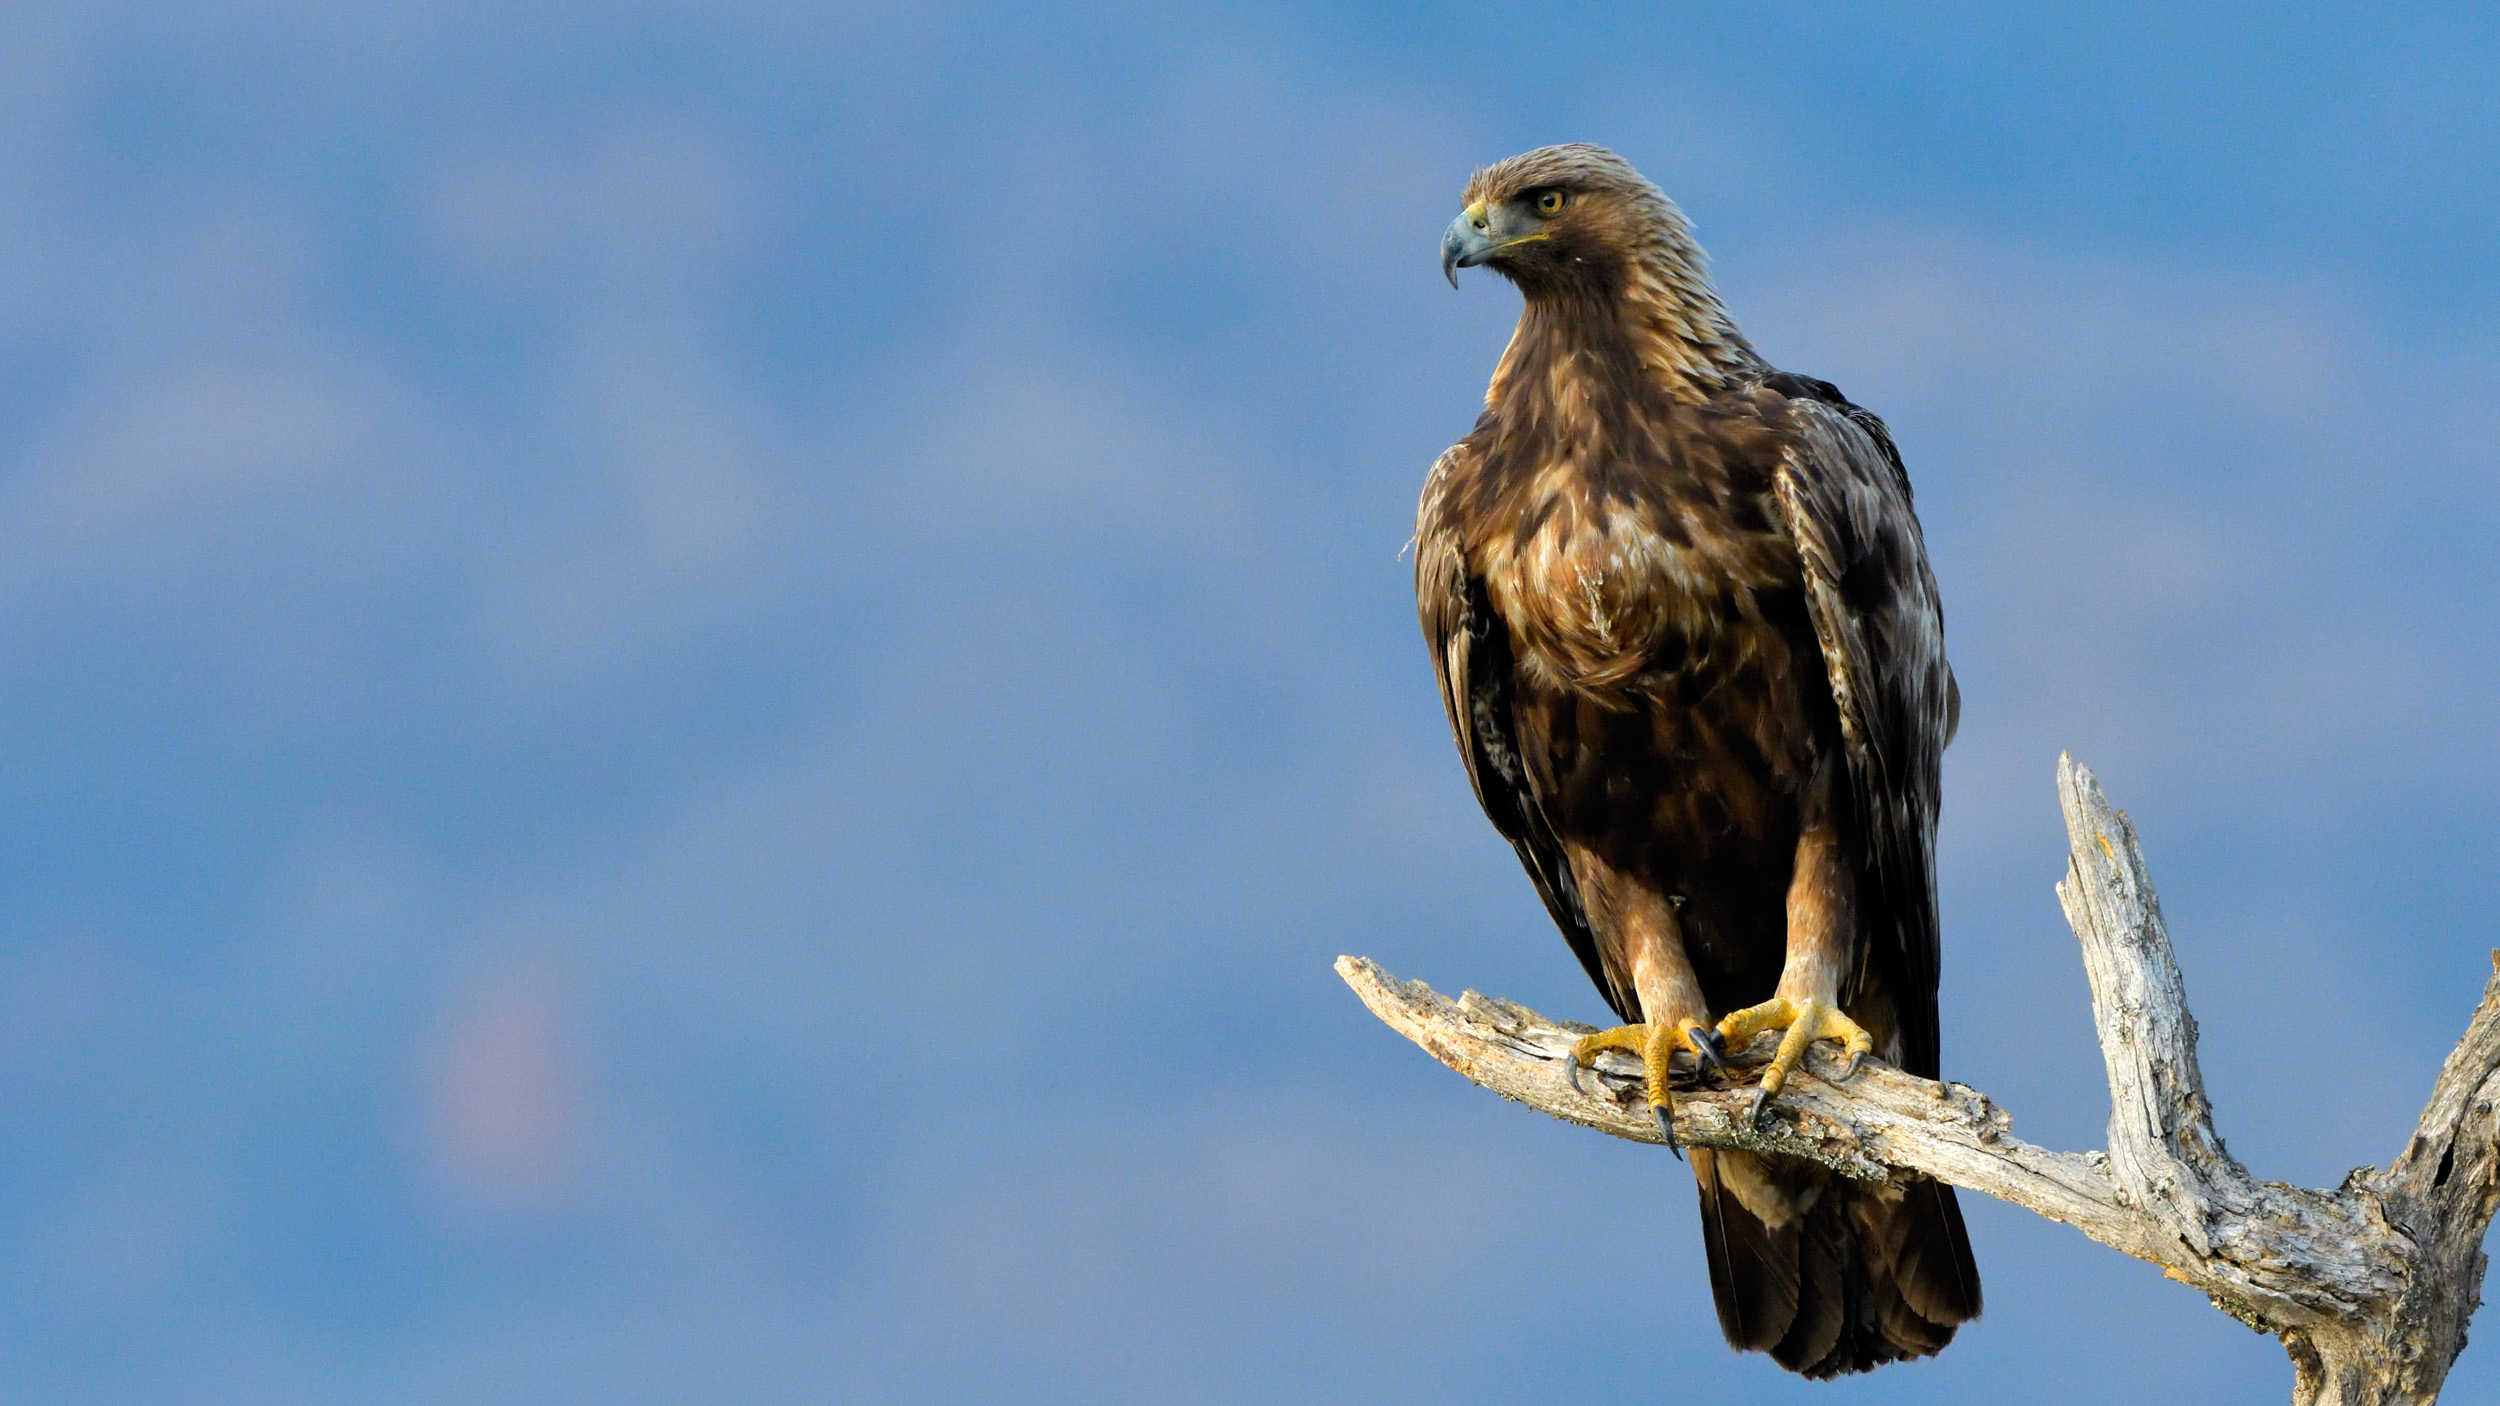 Golden Eagle perched on a branch in winter with a blue sky in the background.